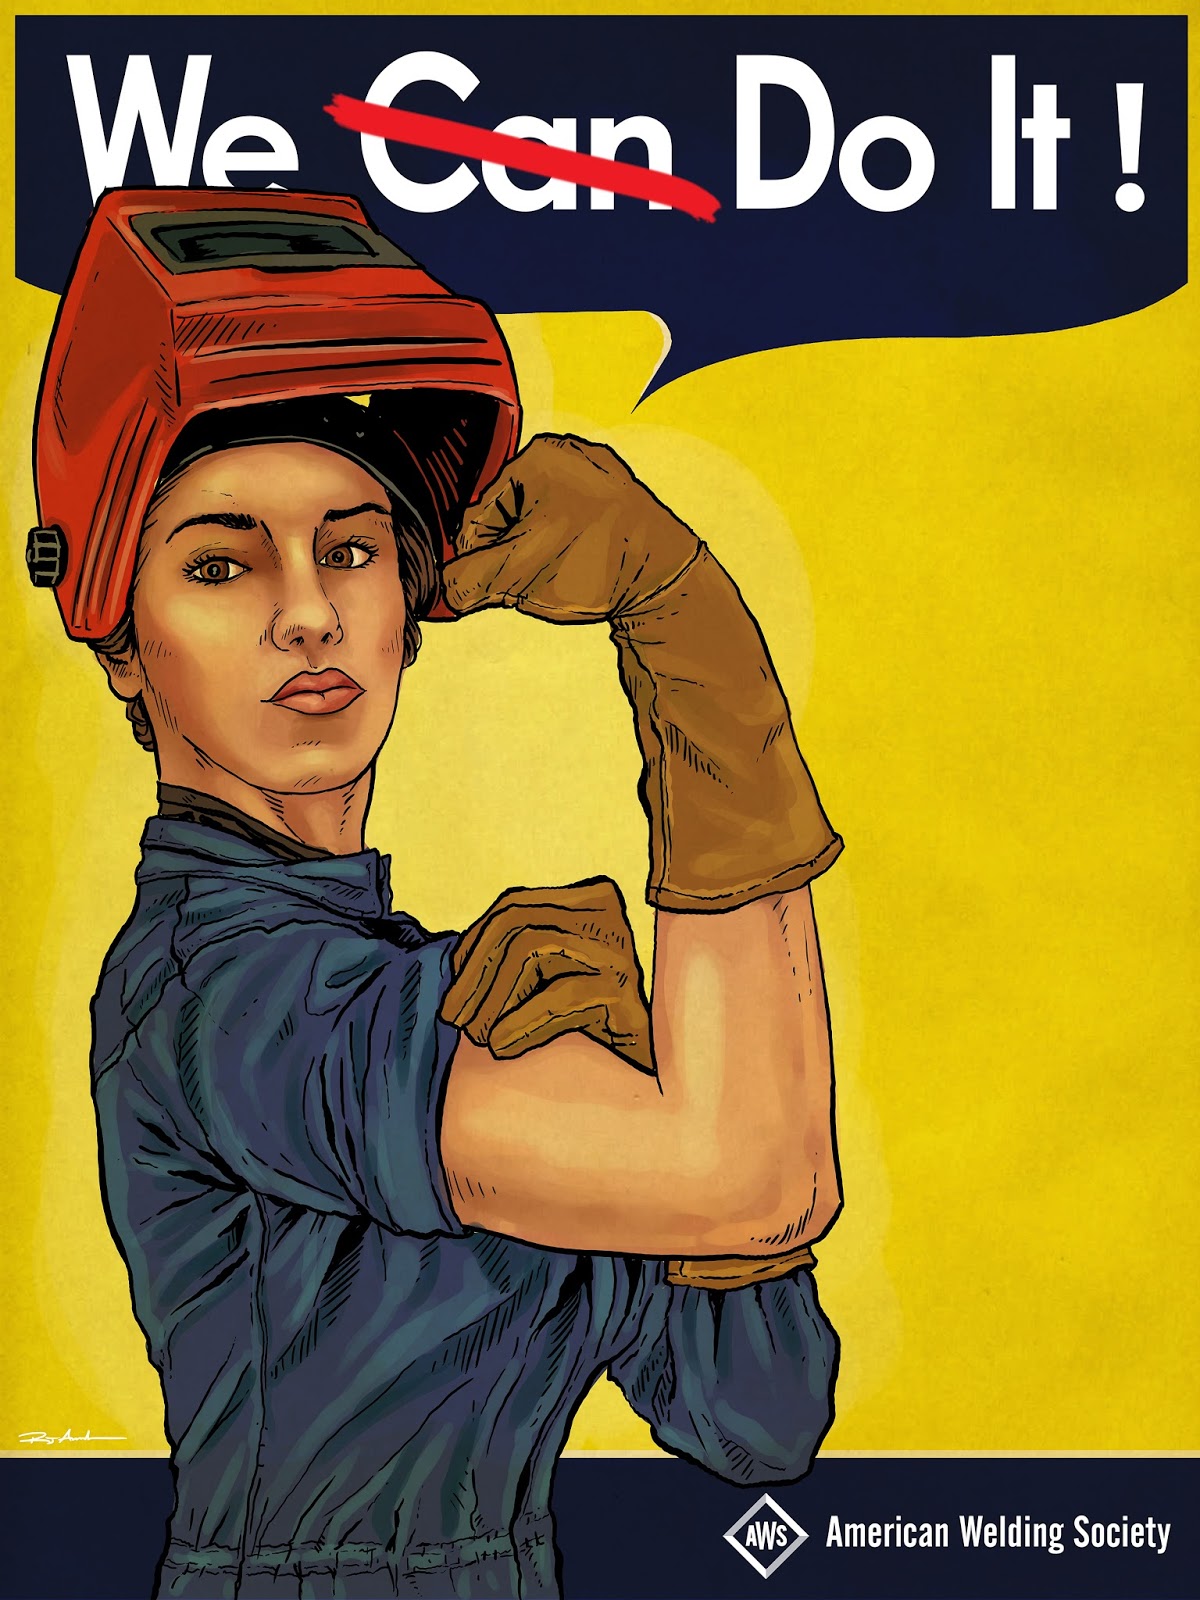 We can download. Rosie the Riveter плакат. It плакат. We can do. We can poster.